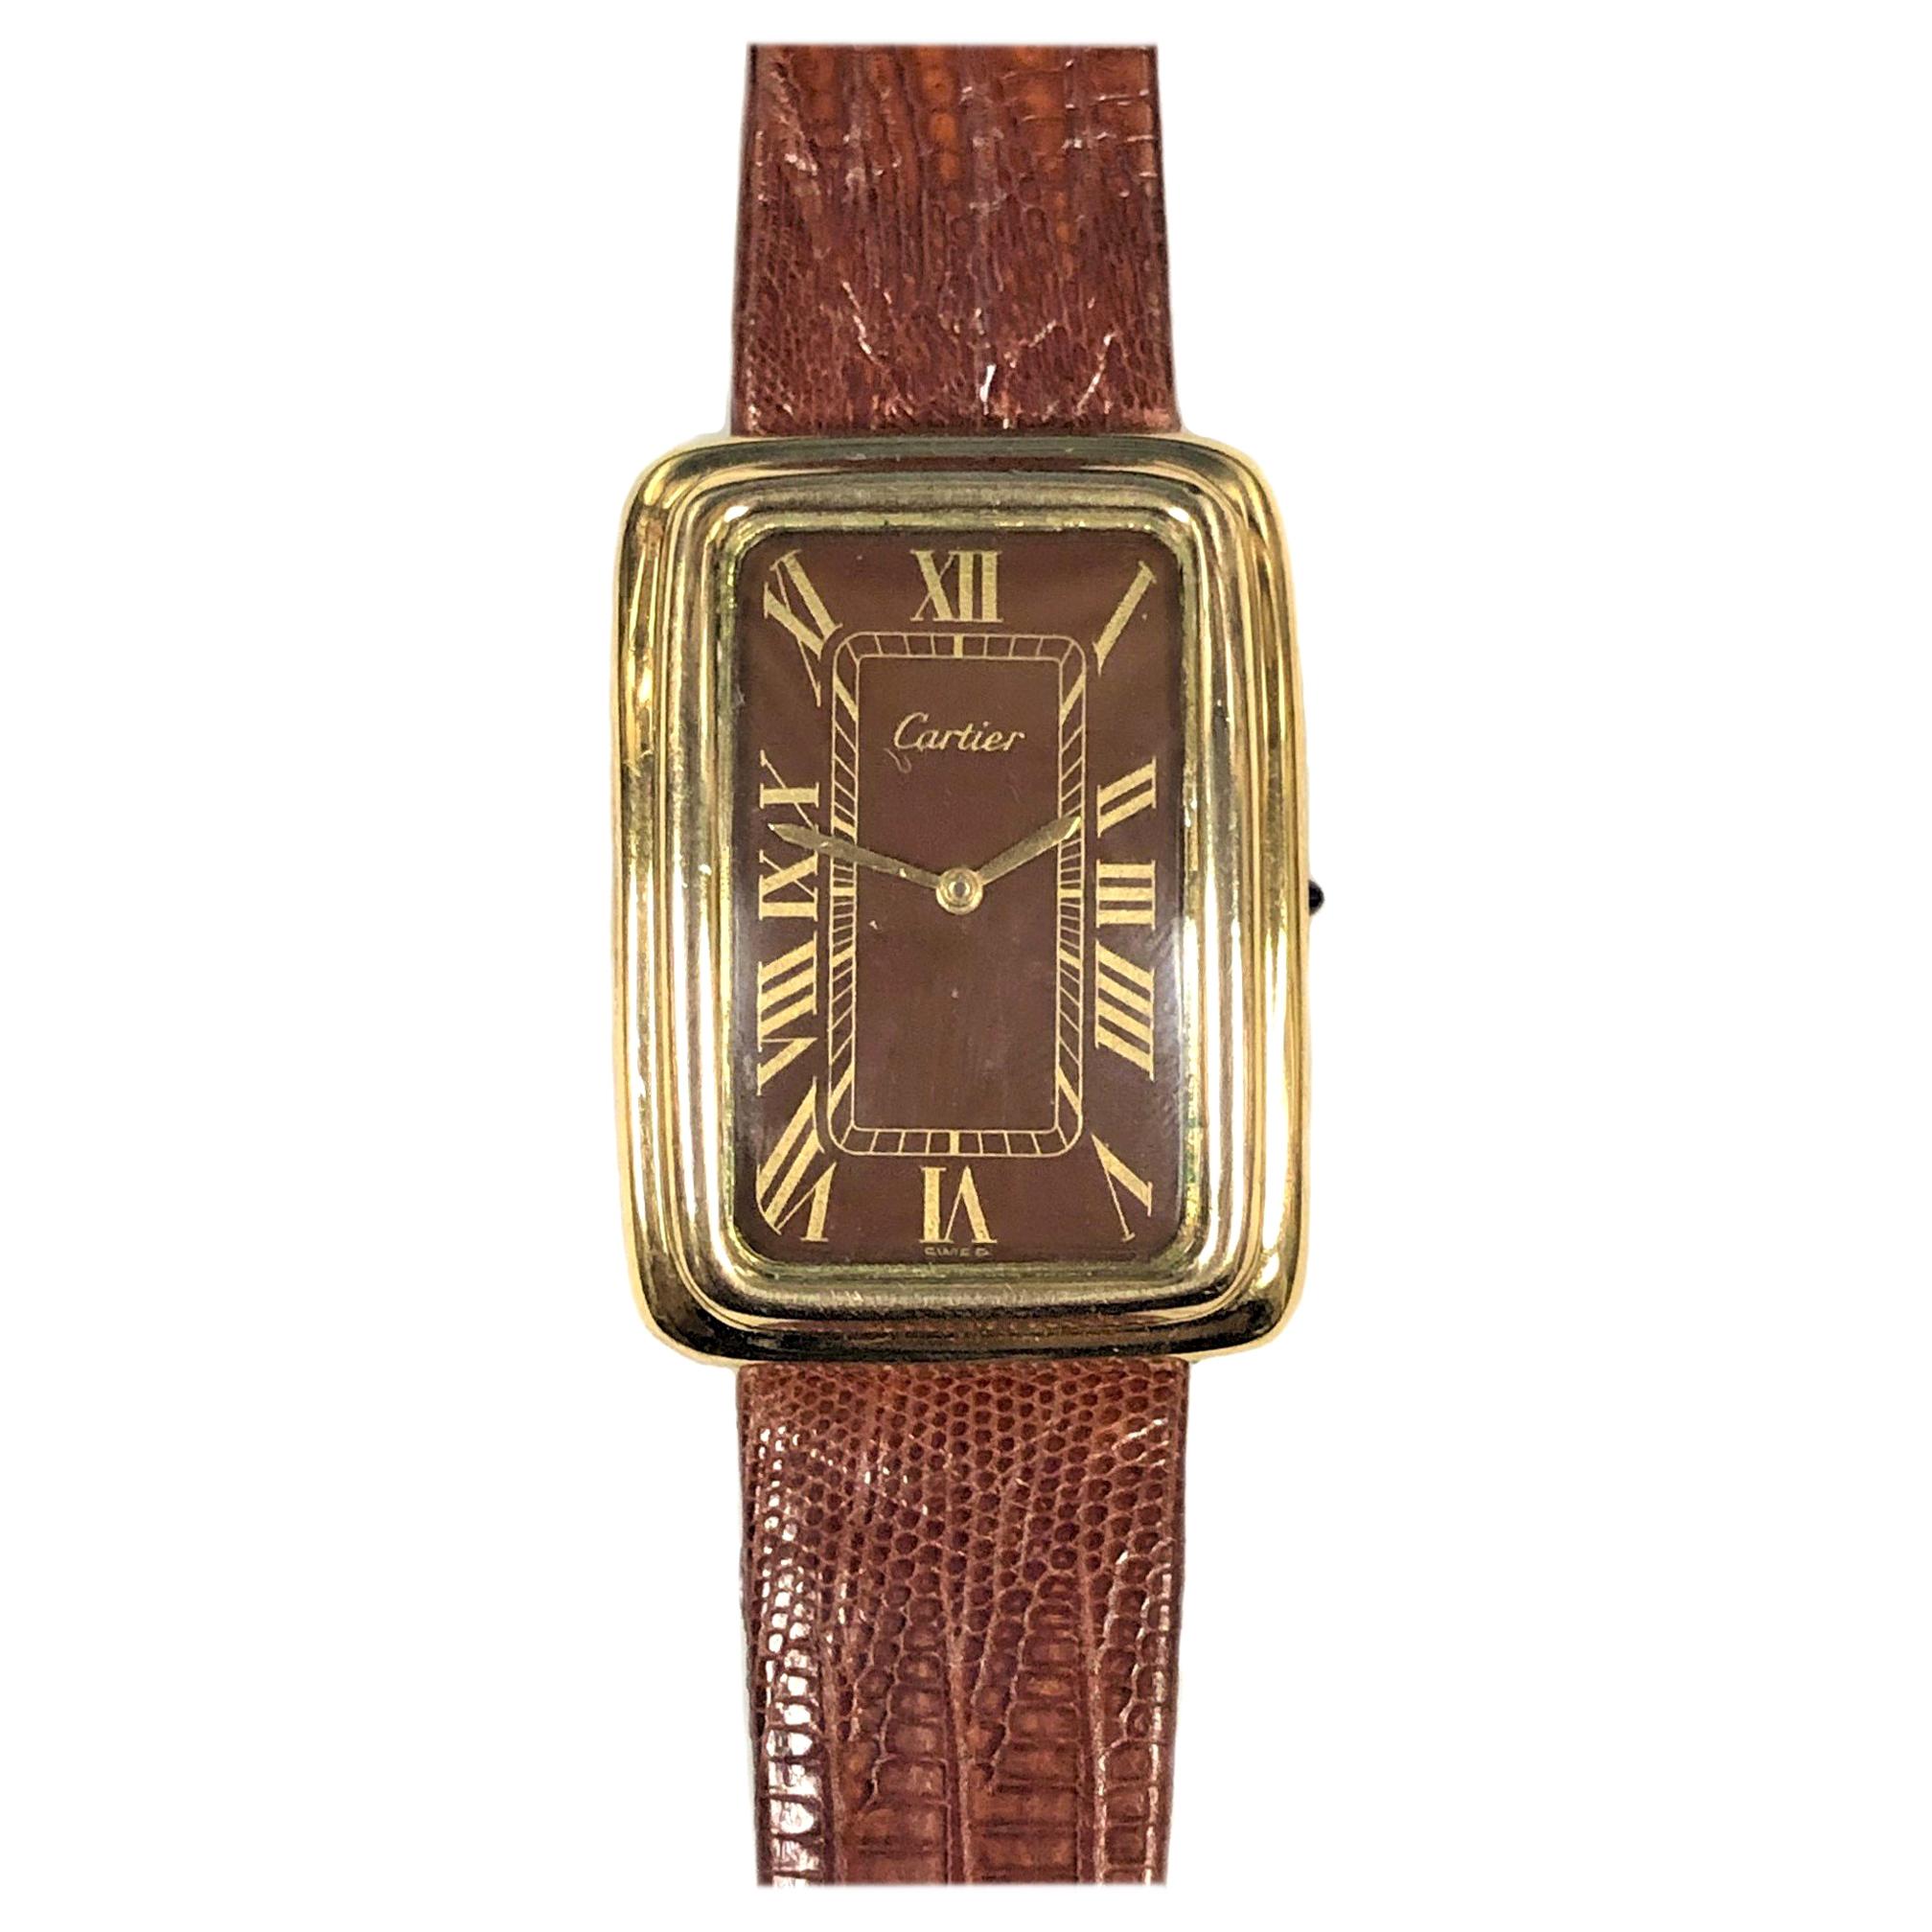 Cartier 1970s Large Stepped Case Mechanical Wristwatch